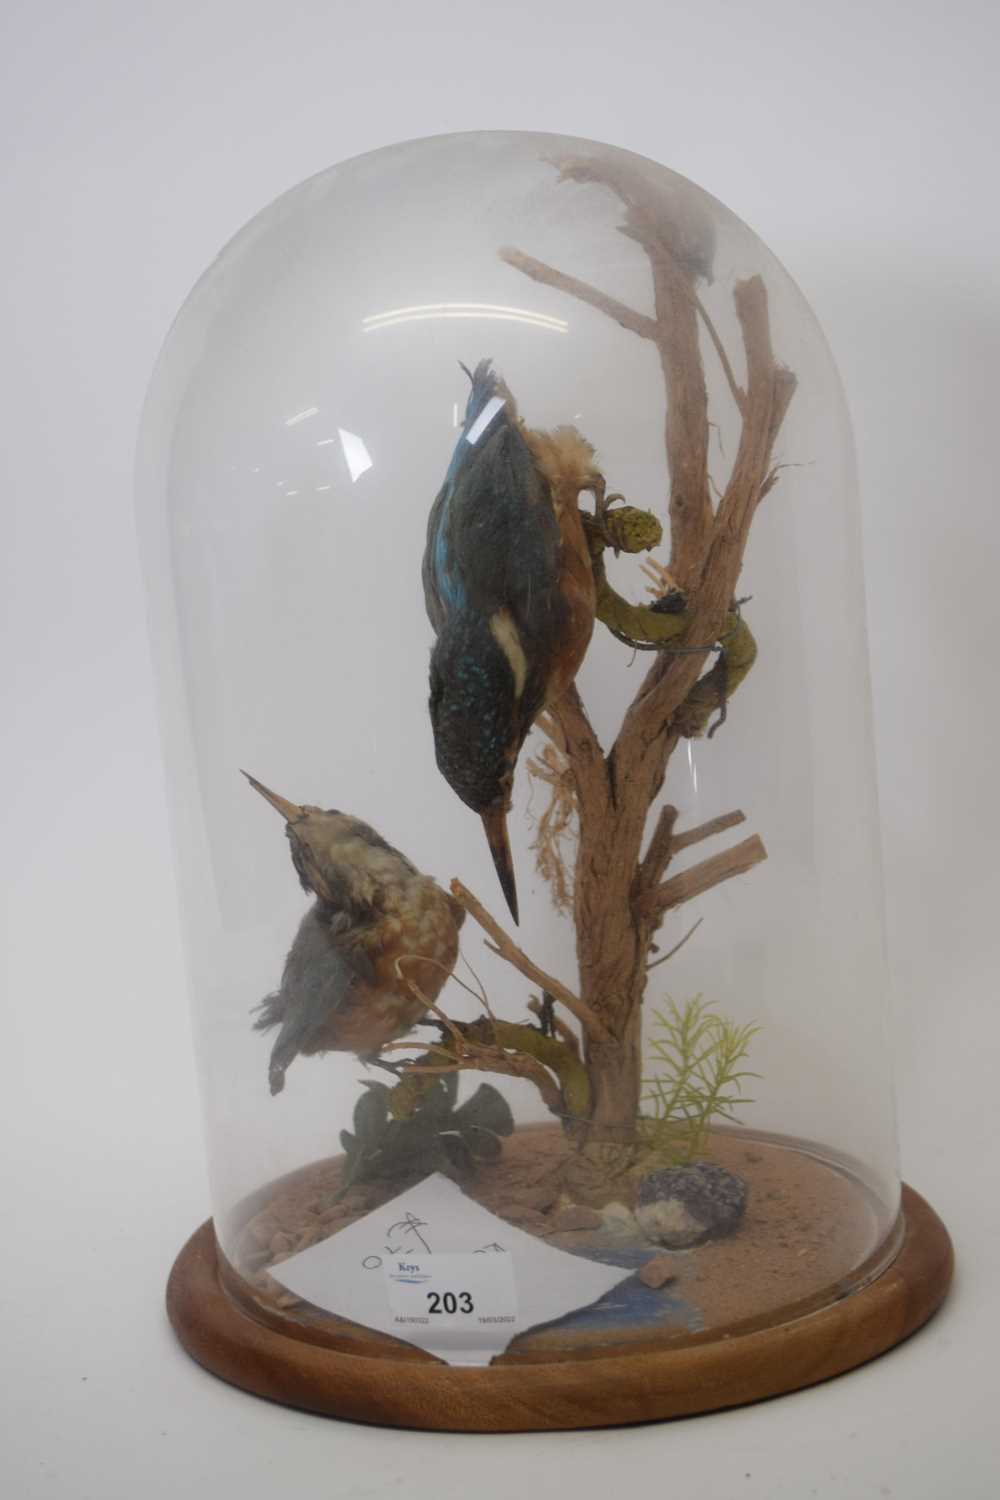 Taxidermy - Study of two Kingfishers under a glass dome, 33cm high